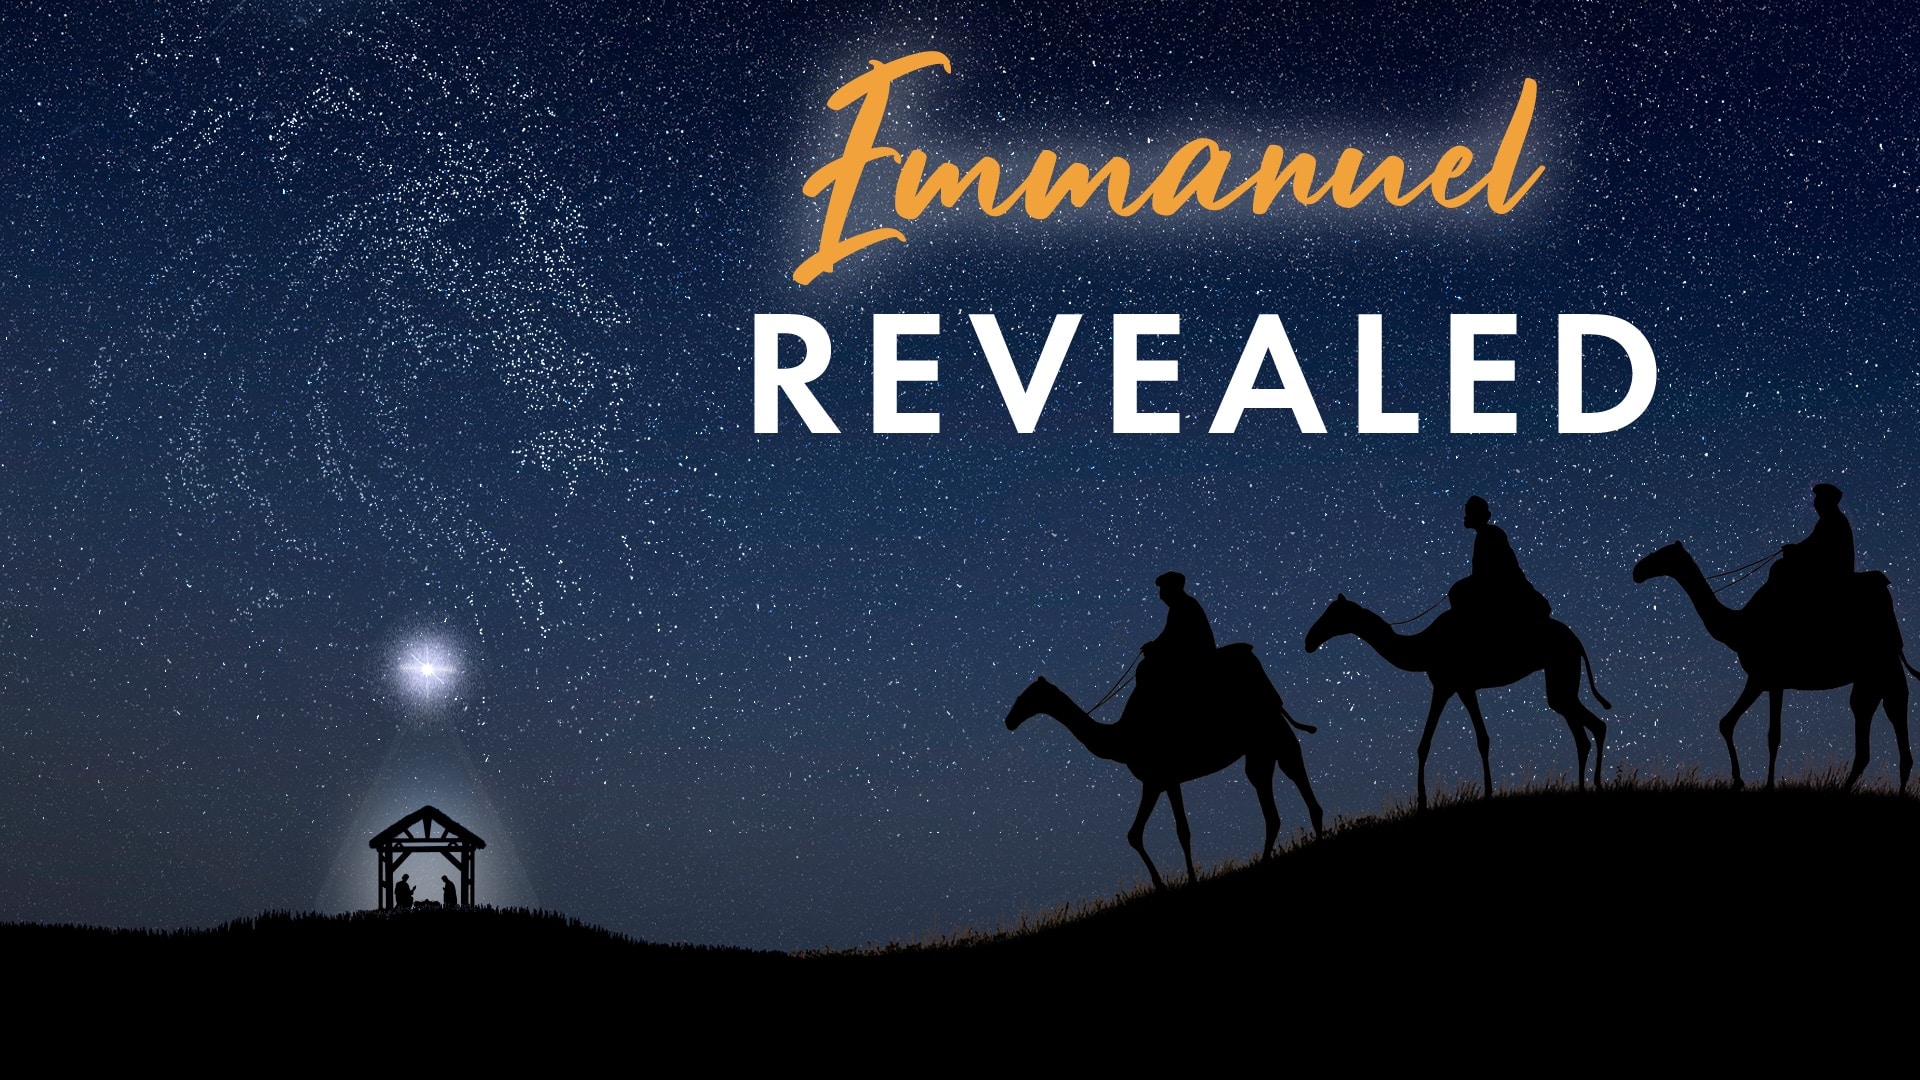 Emmanuel Revealed: The Child and the Dragon Image